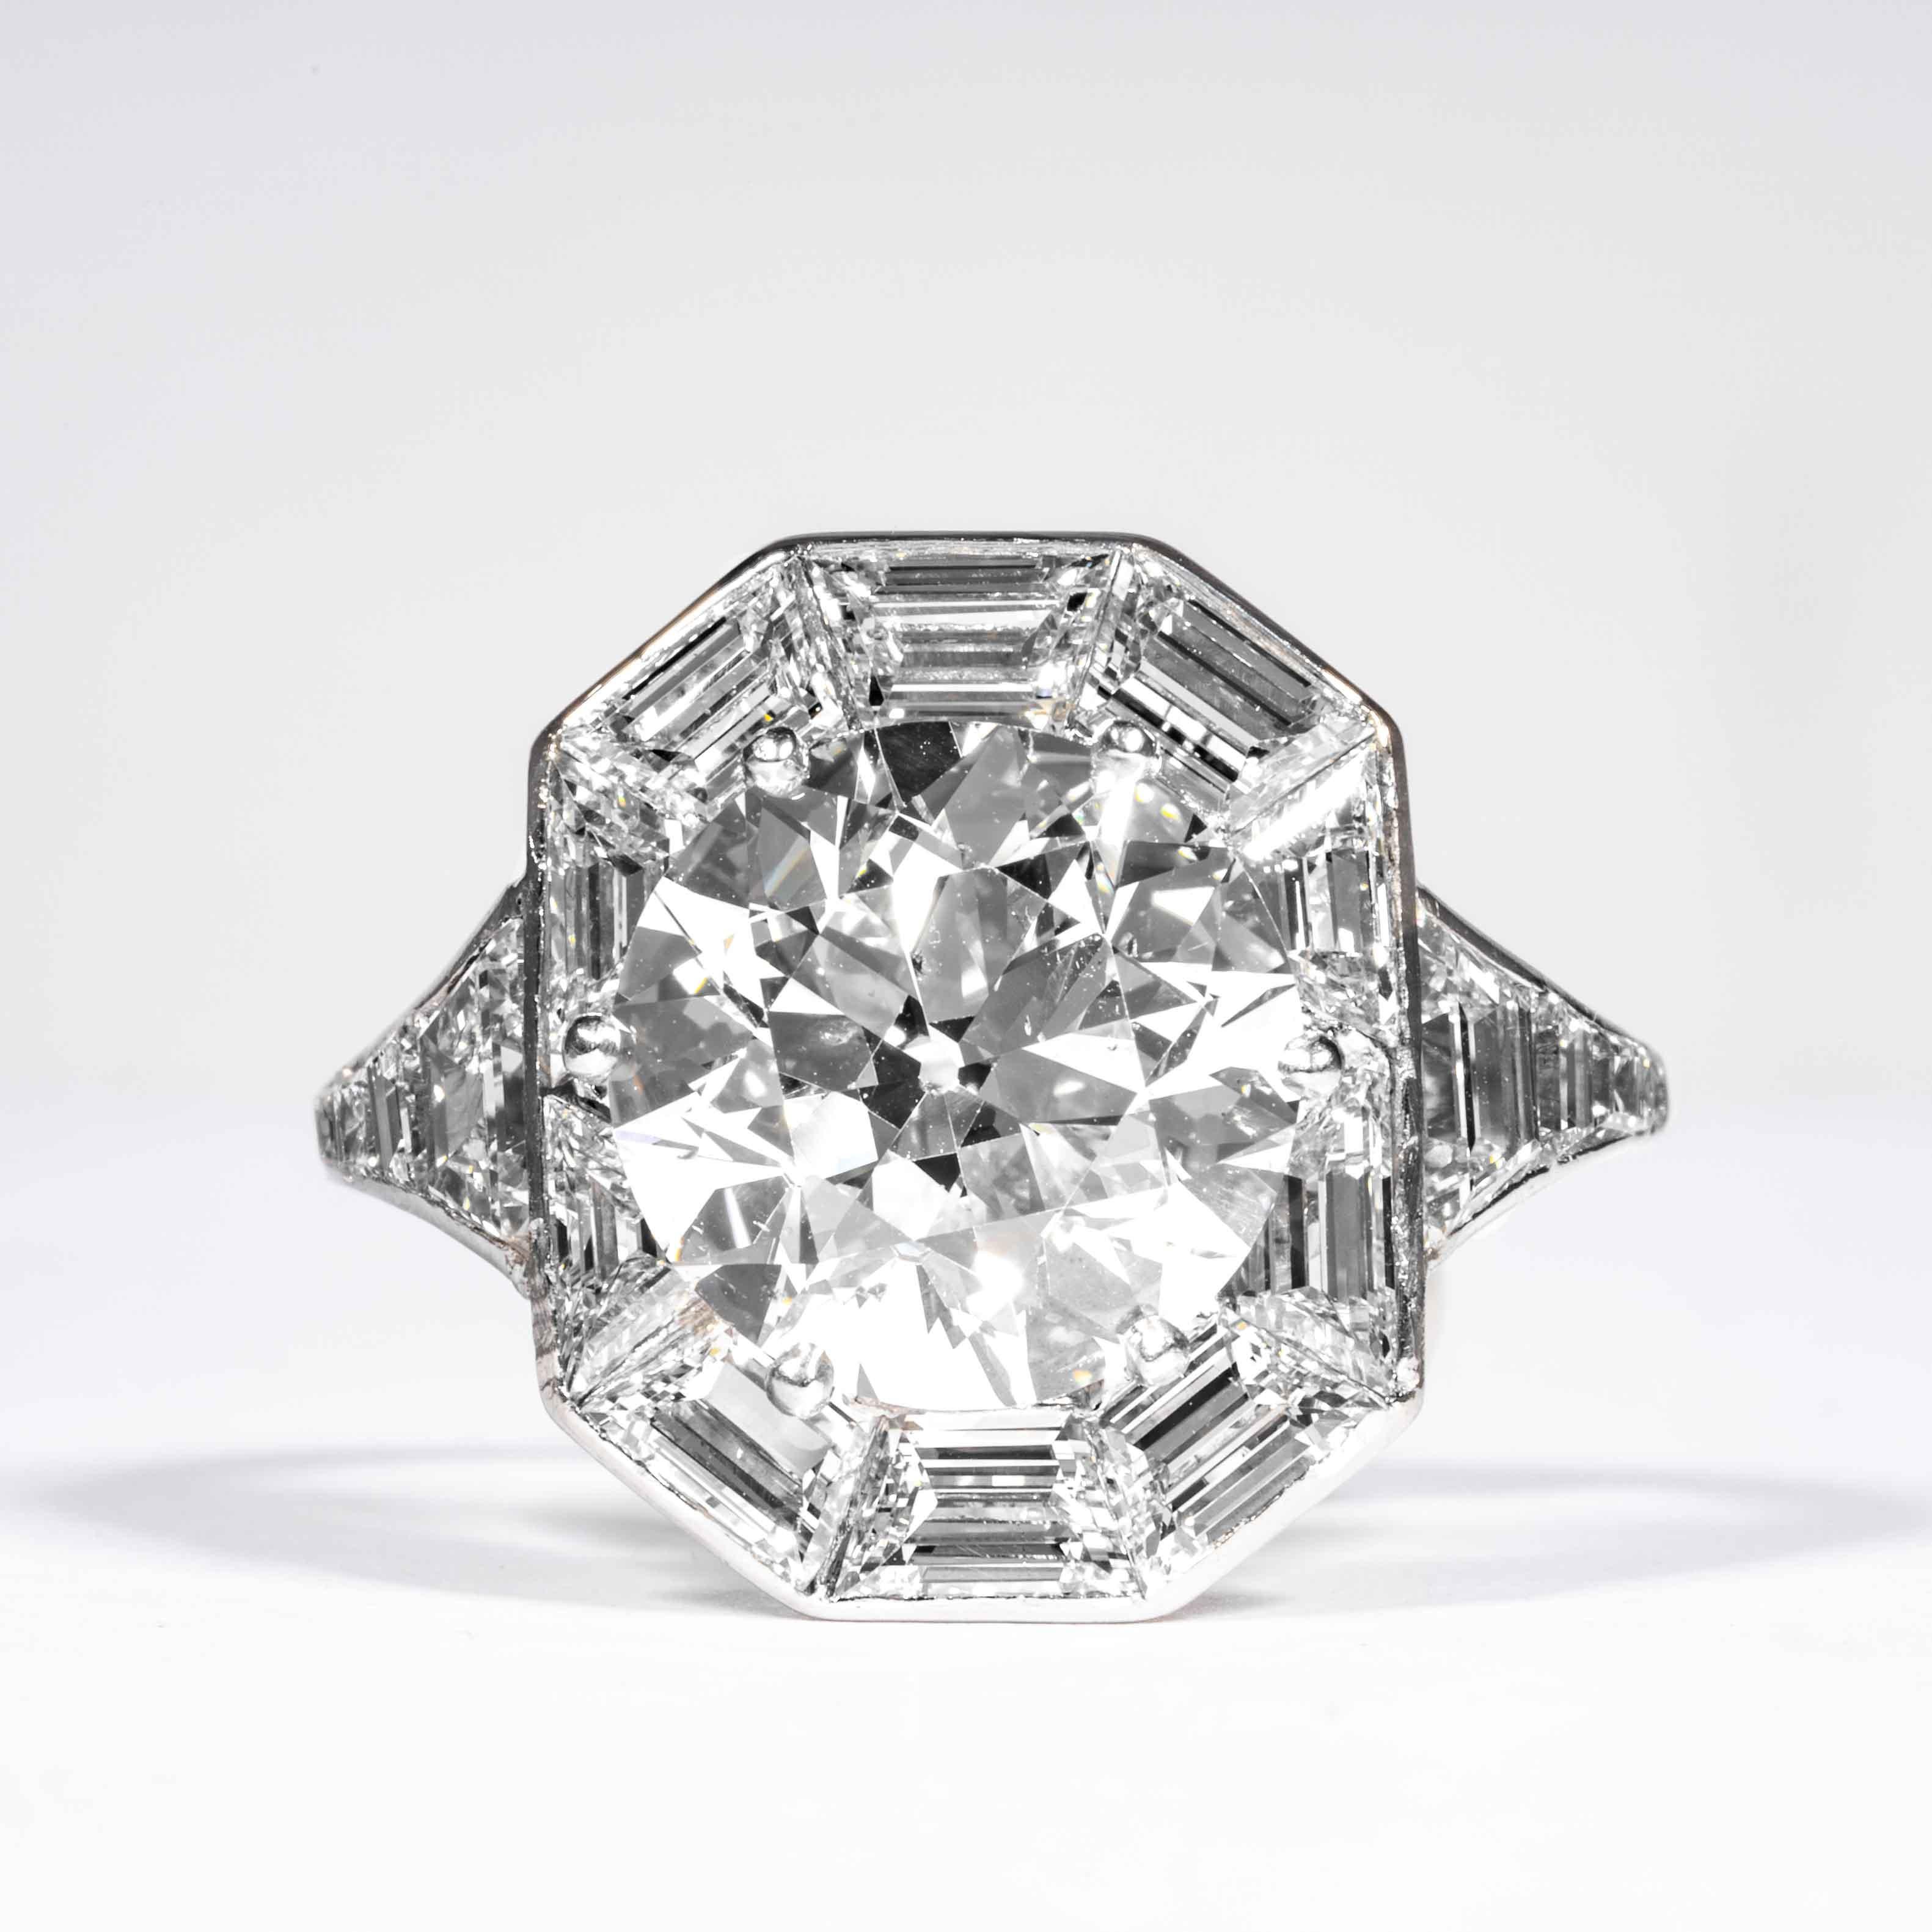 This elegant and classic diamond ring is offered by Shreve, Crump & Low. This 4.92 carat GIA Certified I SI2 old european cut diamond measuring is a unique and enchanting art deco platinum and diamond ring. The 4.92 carat center diamond is accented